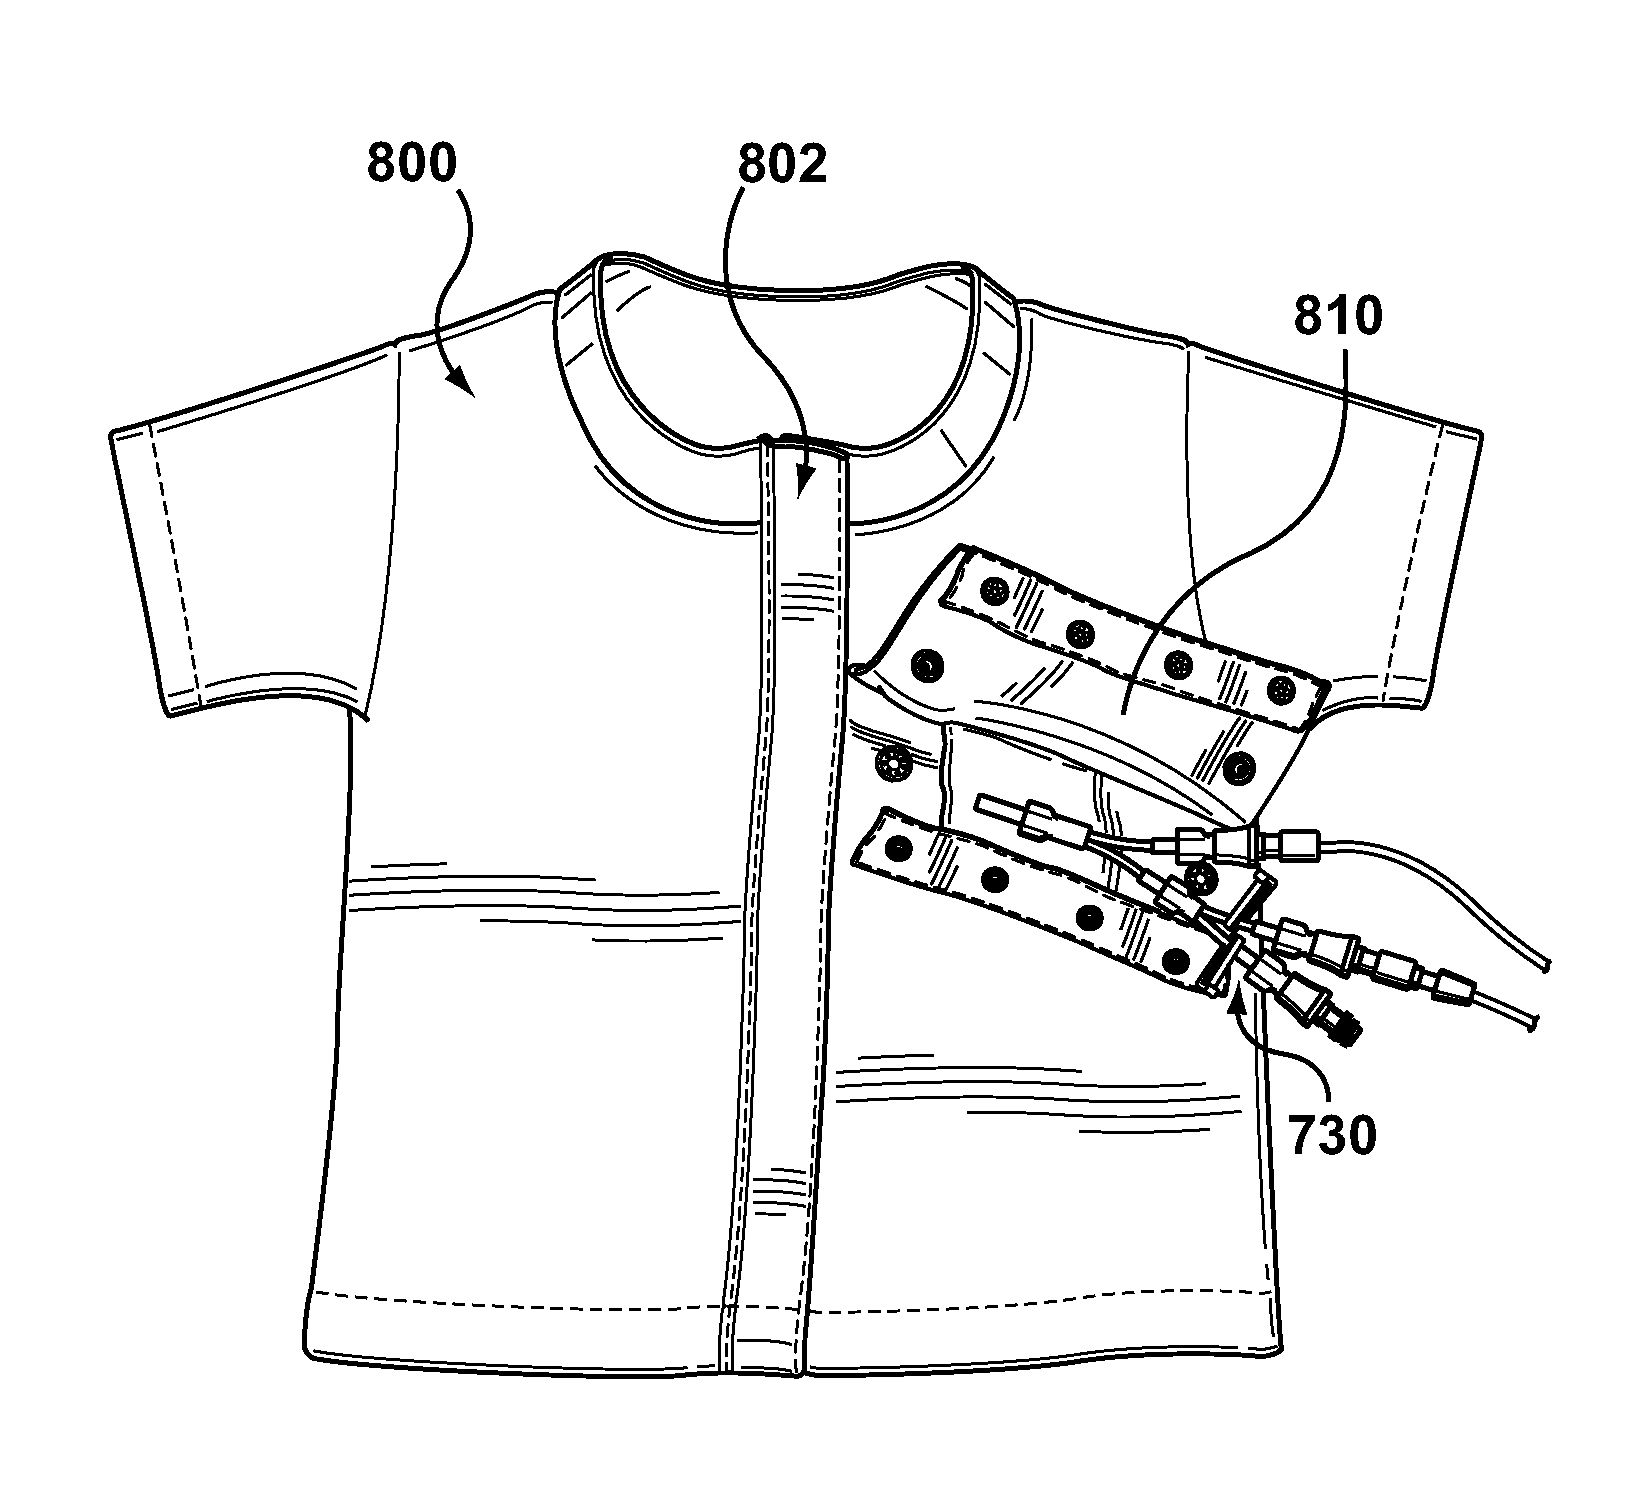 Garment for securing an external portion of a catheter